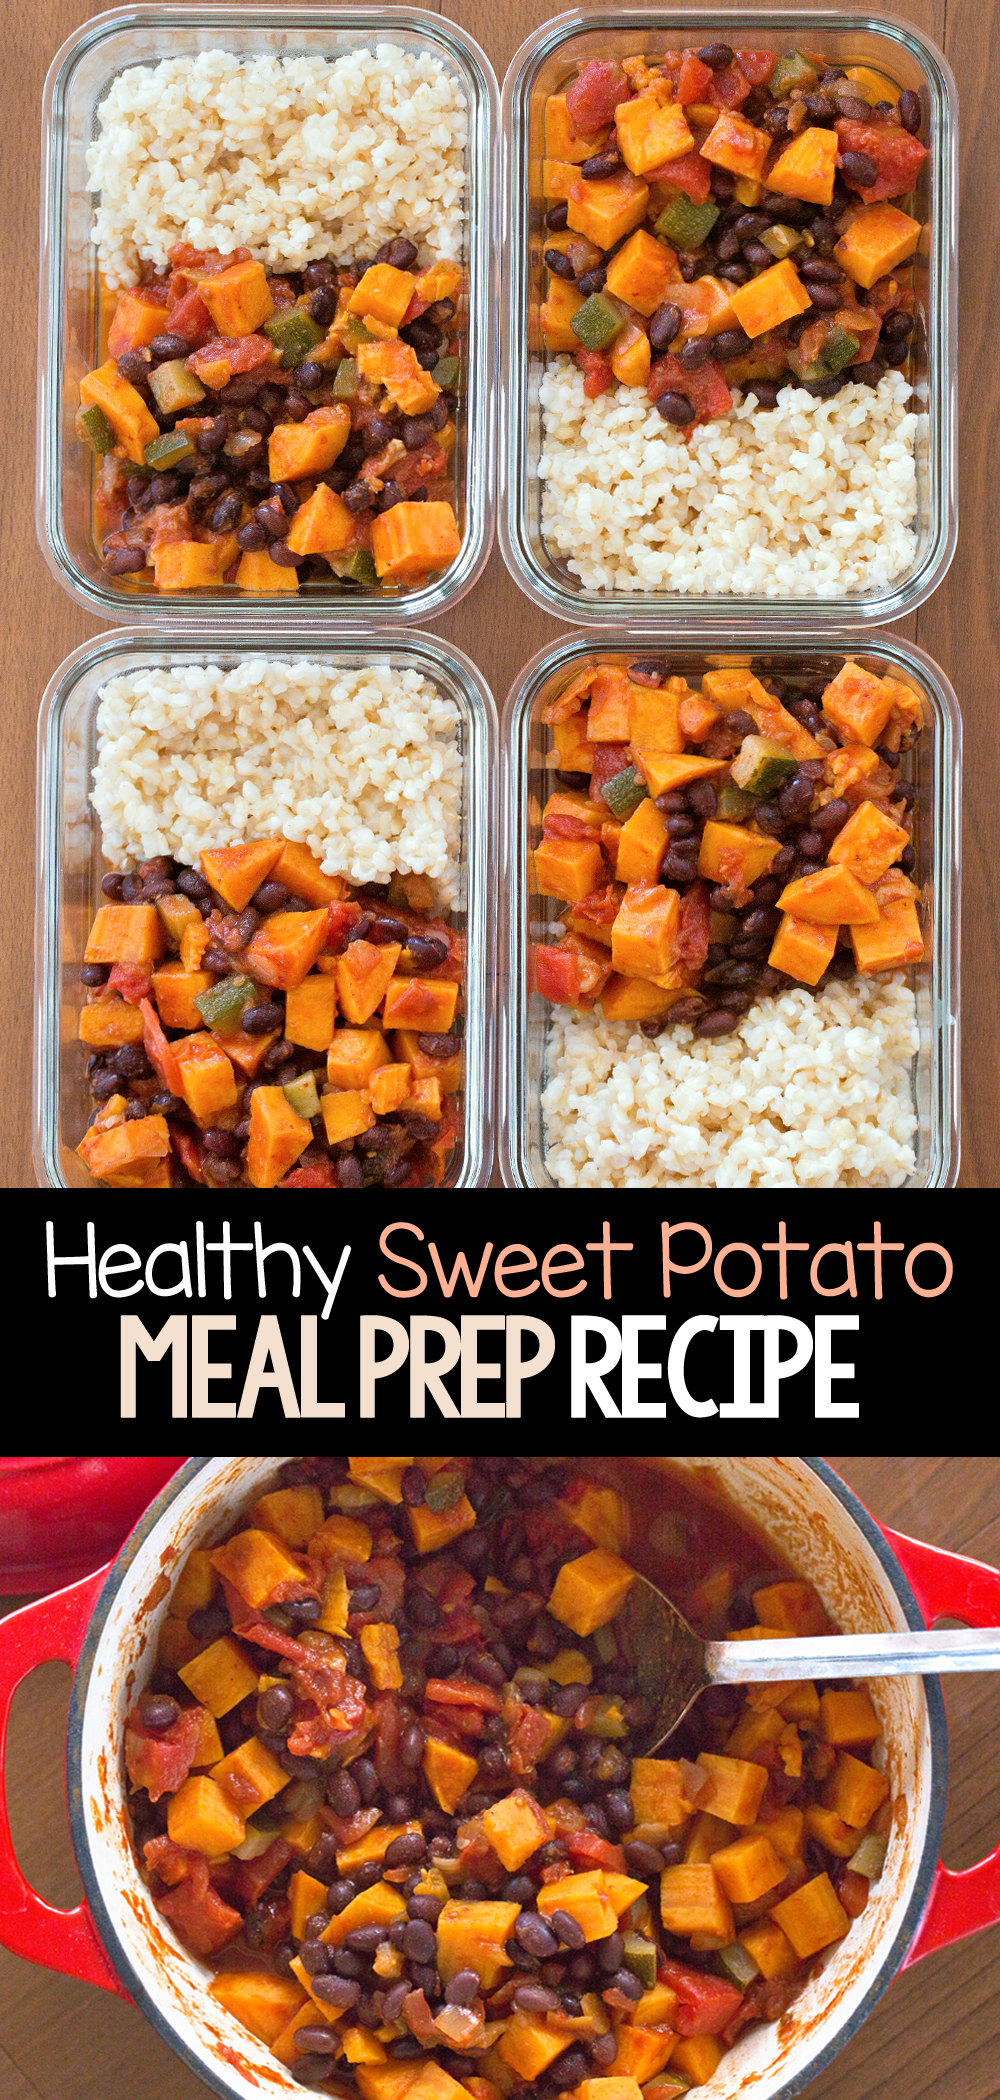 https://chocolatecoveredkatie.com/wp-content/uploads/2023/01/Healthy-Meal-Prep-Sweet-Potatoes.png